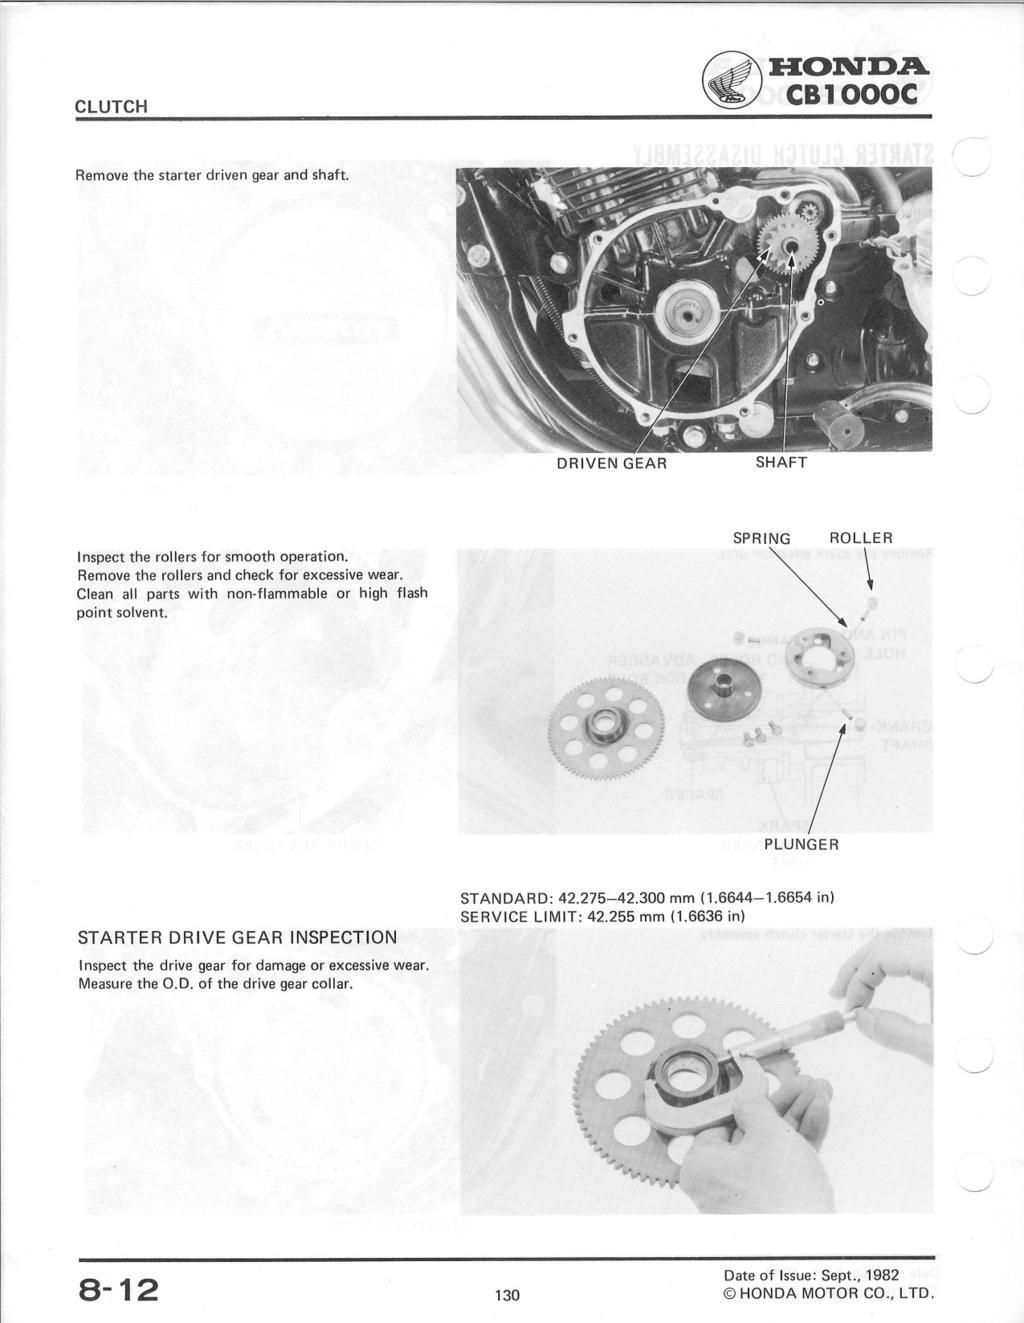 ~ :H:OIV:D.A. CB1000C Remove the starter driven gear and shaft. DRIVEN GEAR SHAFT Inspect the rollers for smooth operation. Remove the rollers and check for excessive wear.